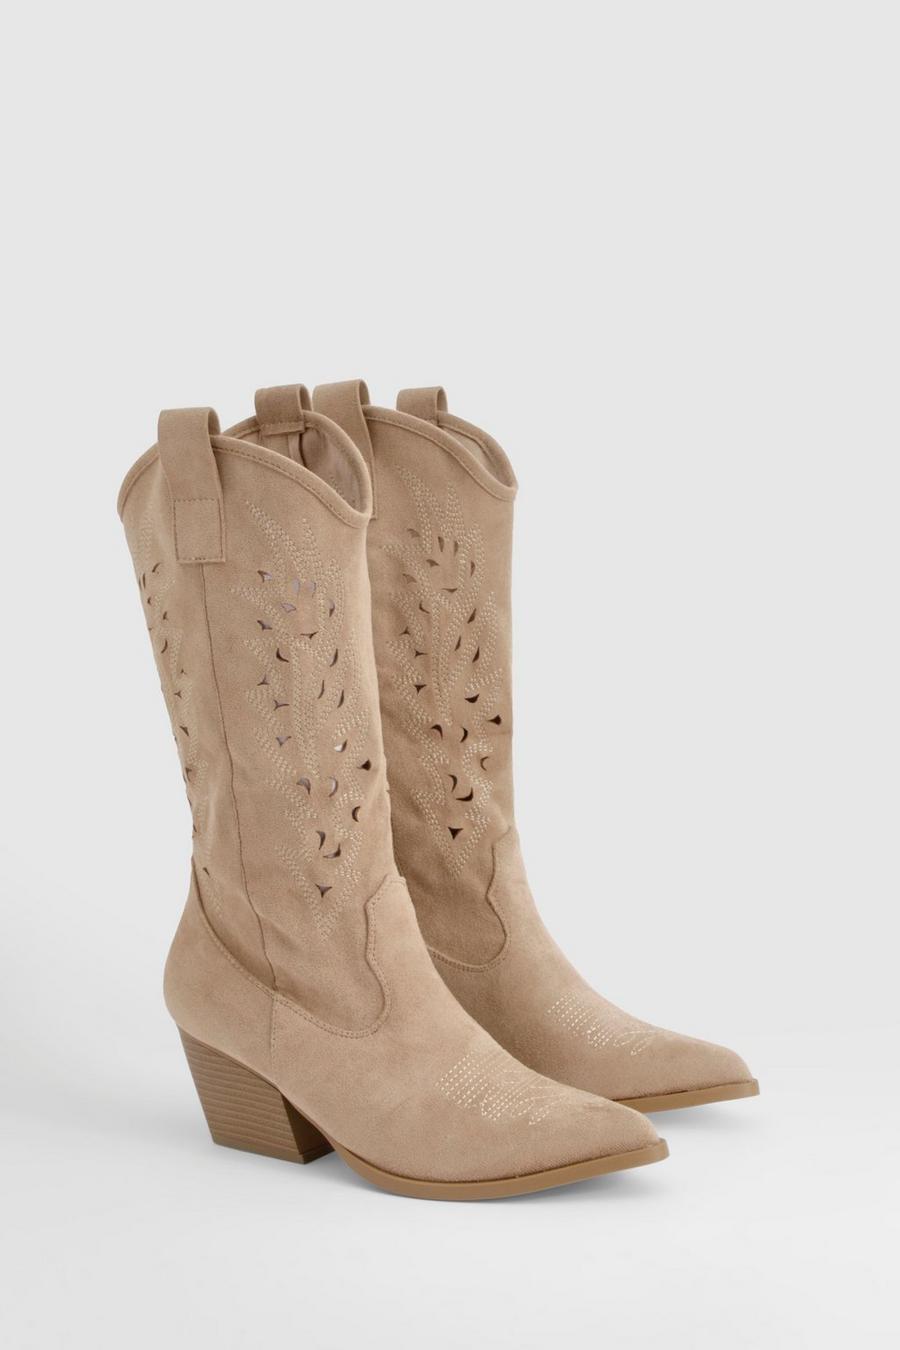 Kniehohe Western-Stiefel mit Cut-Out Detail, Sand